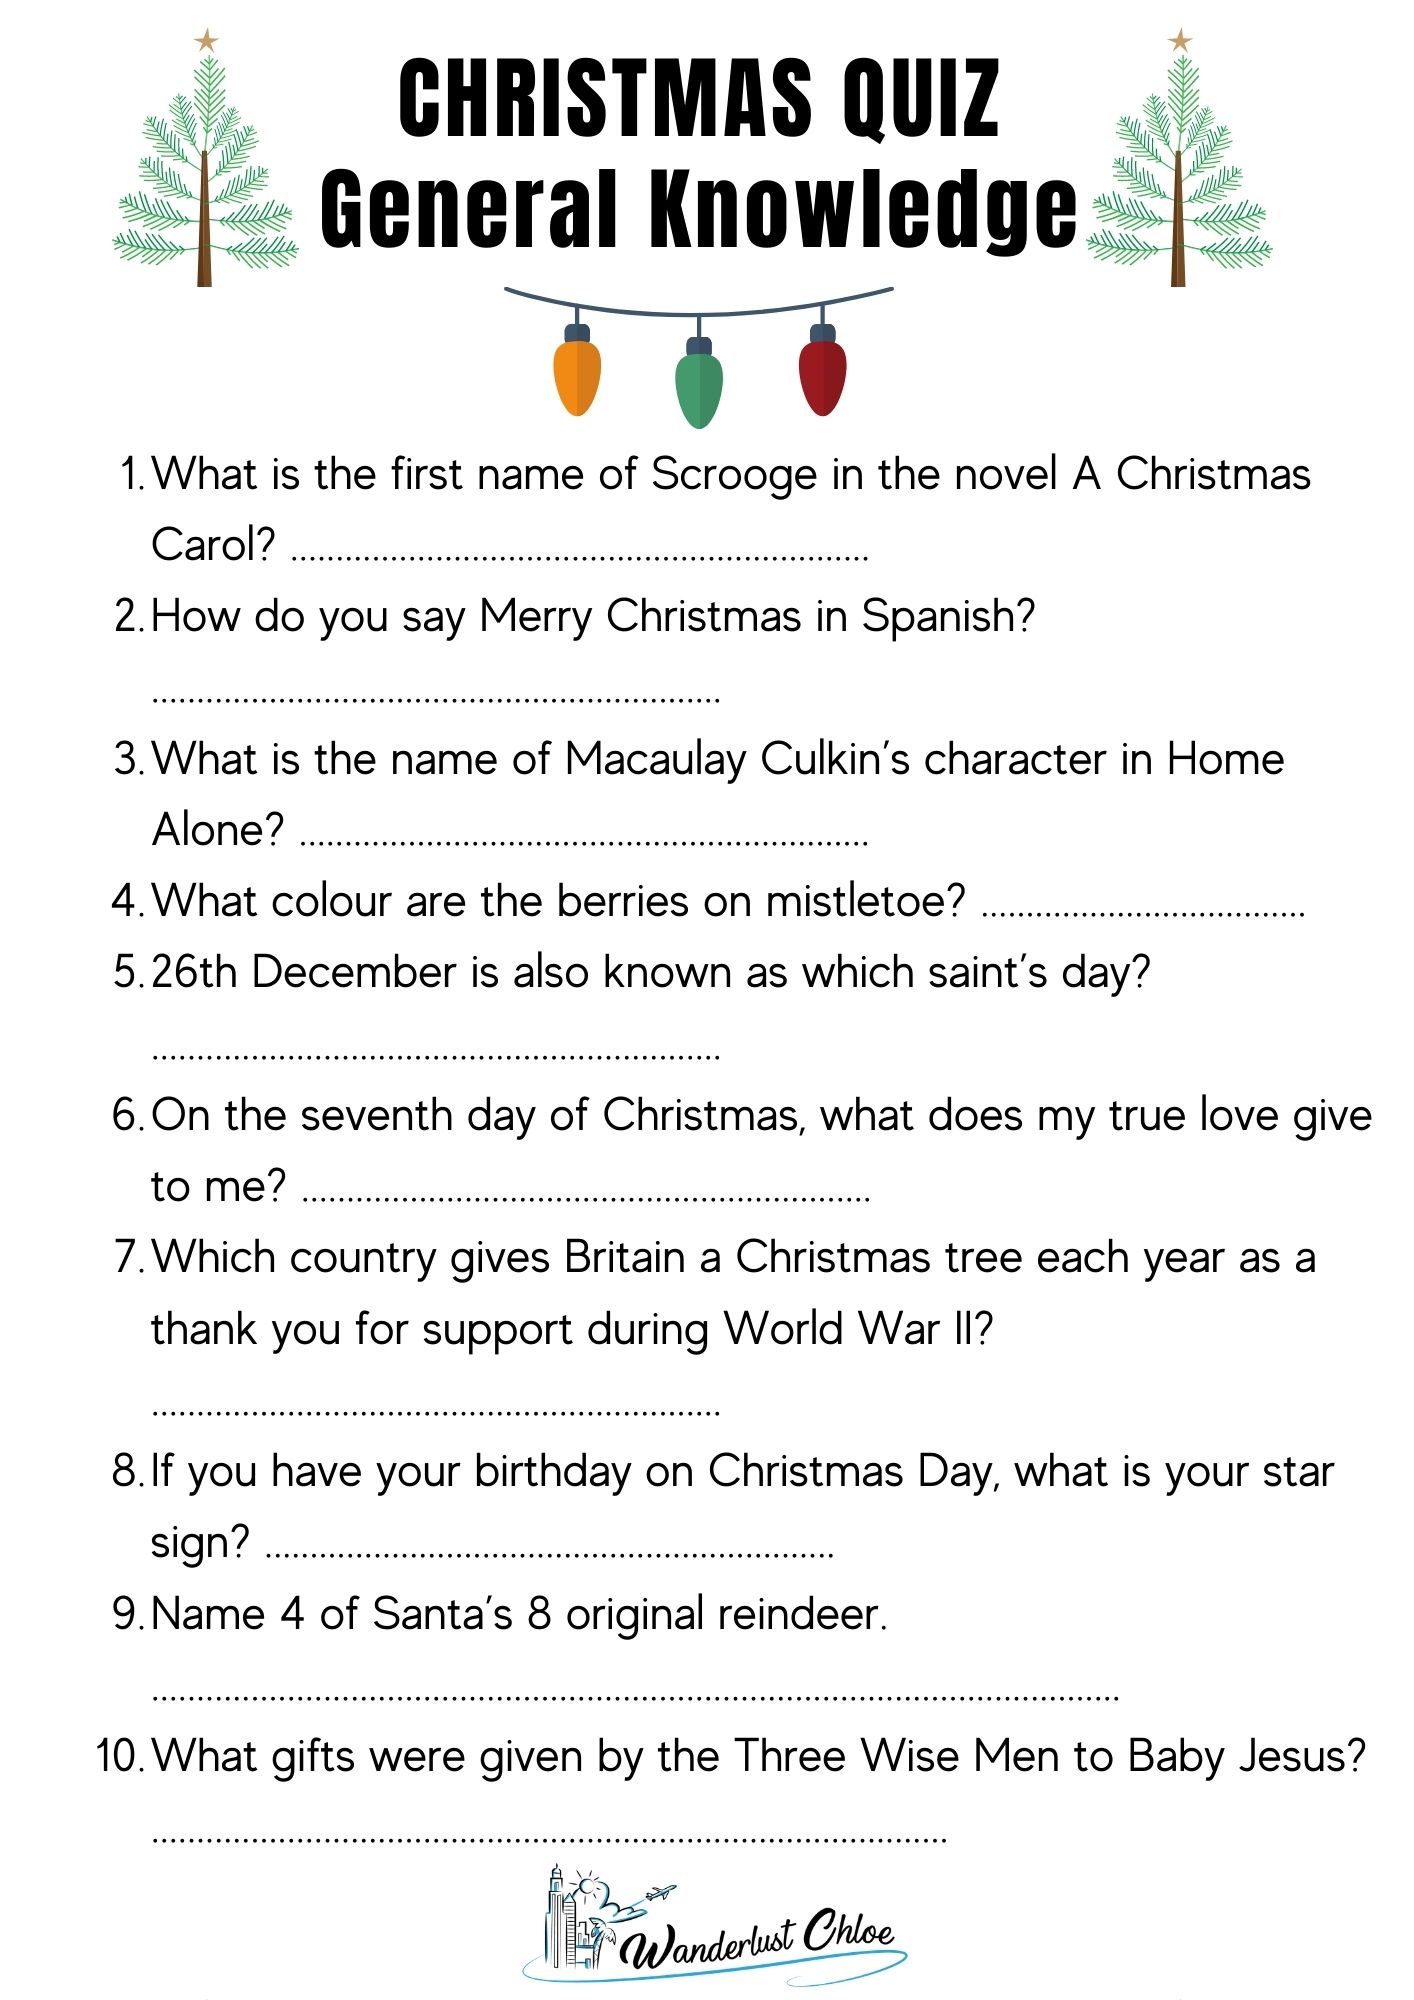 50 Christmas Quiz Questions Printable Picture Rounds Answers 2021